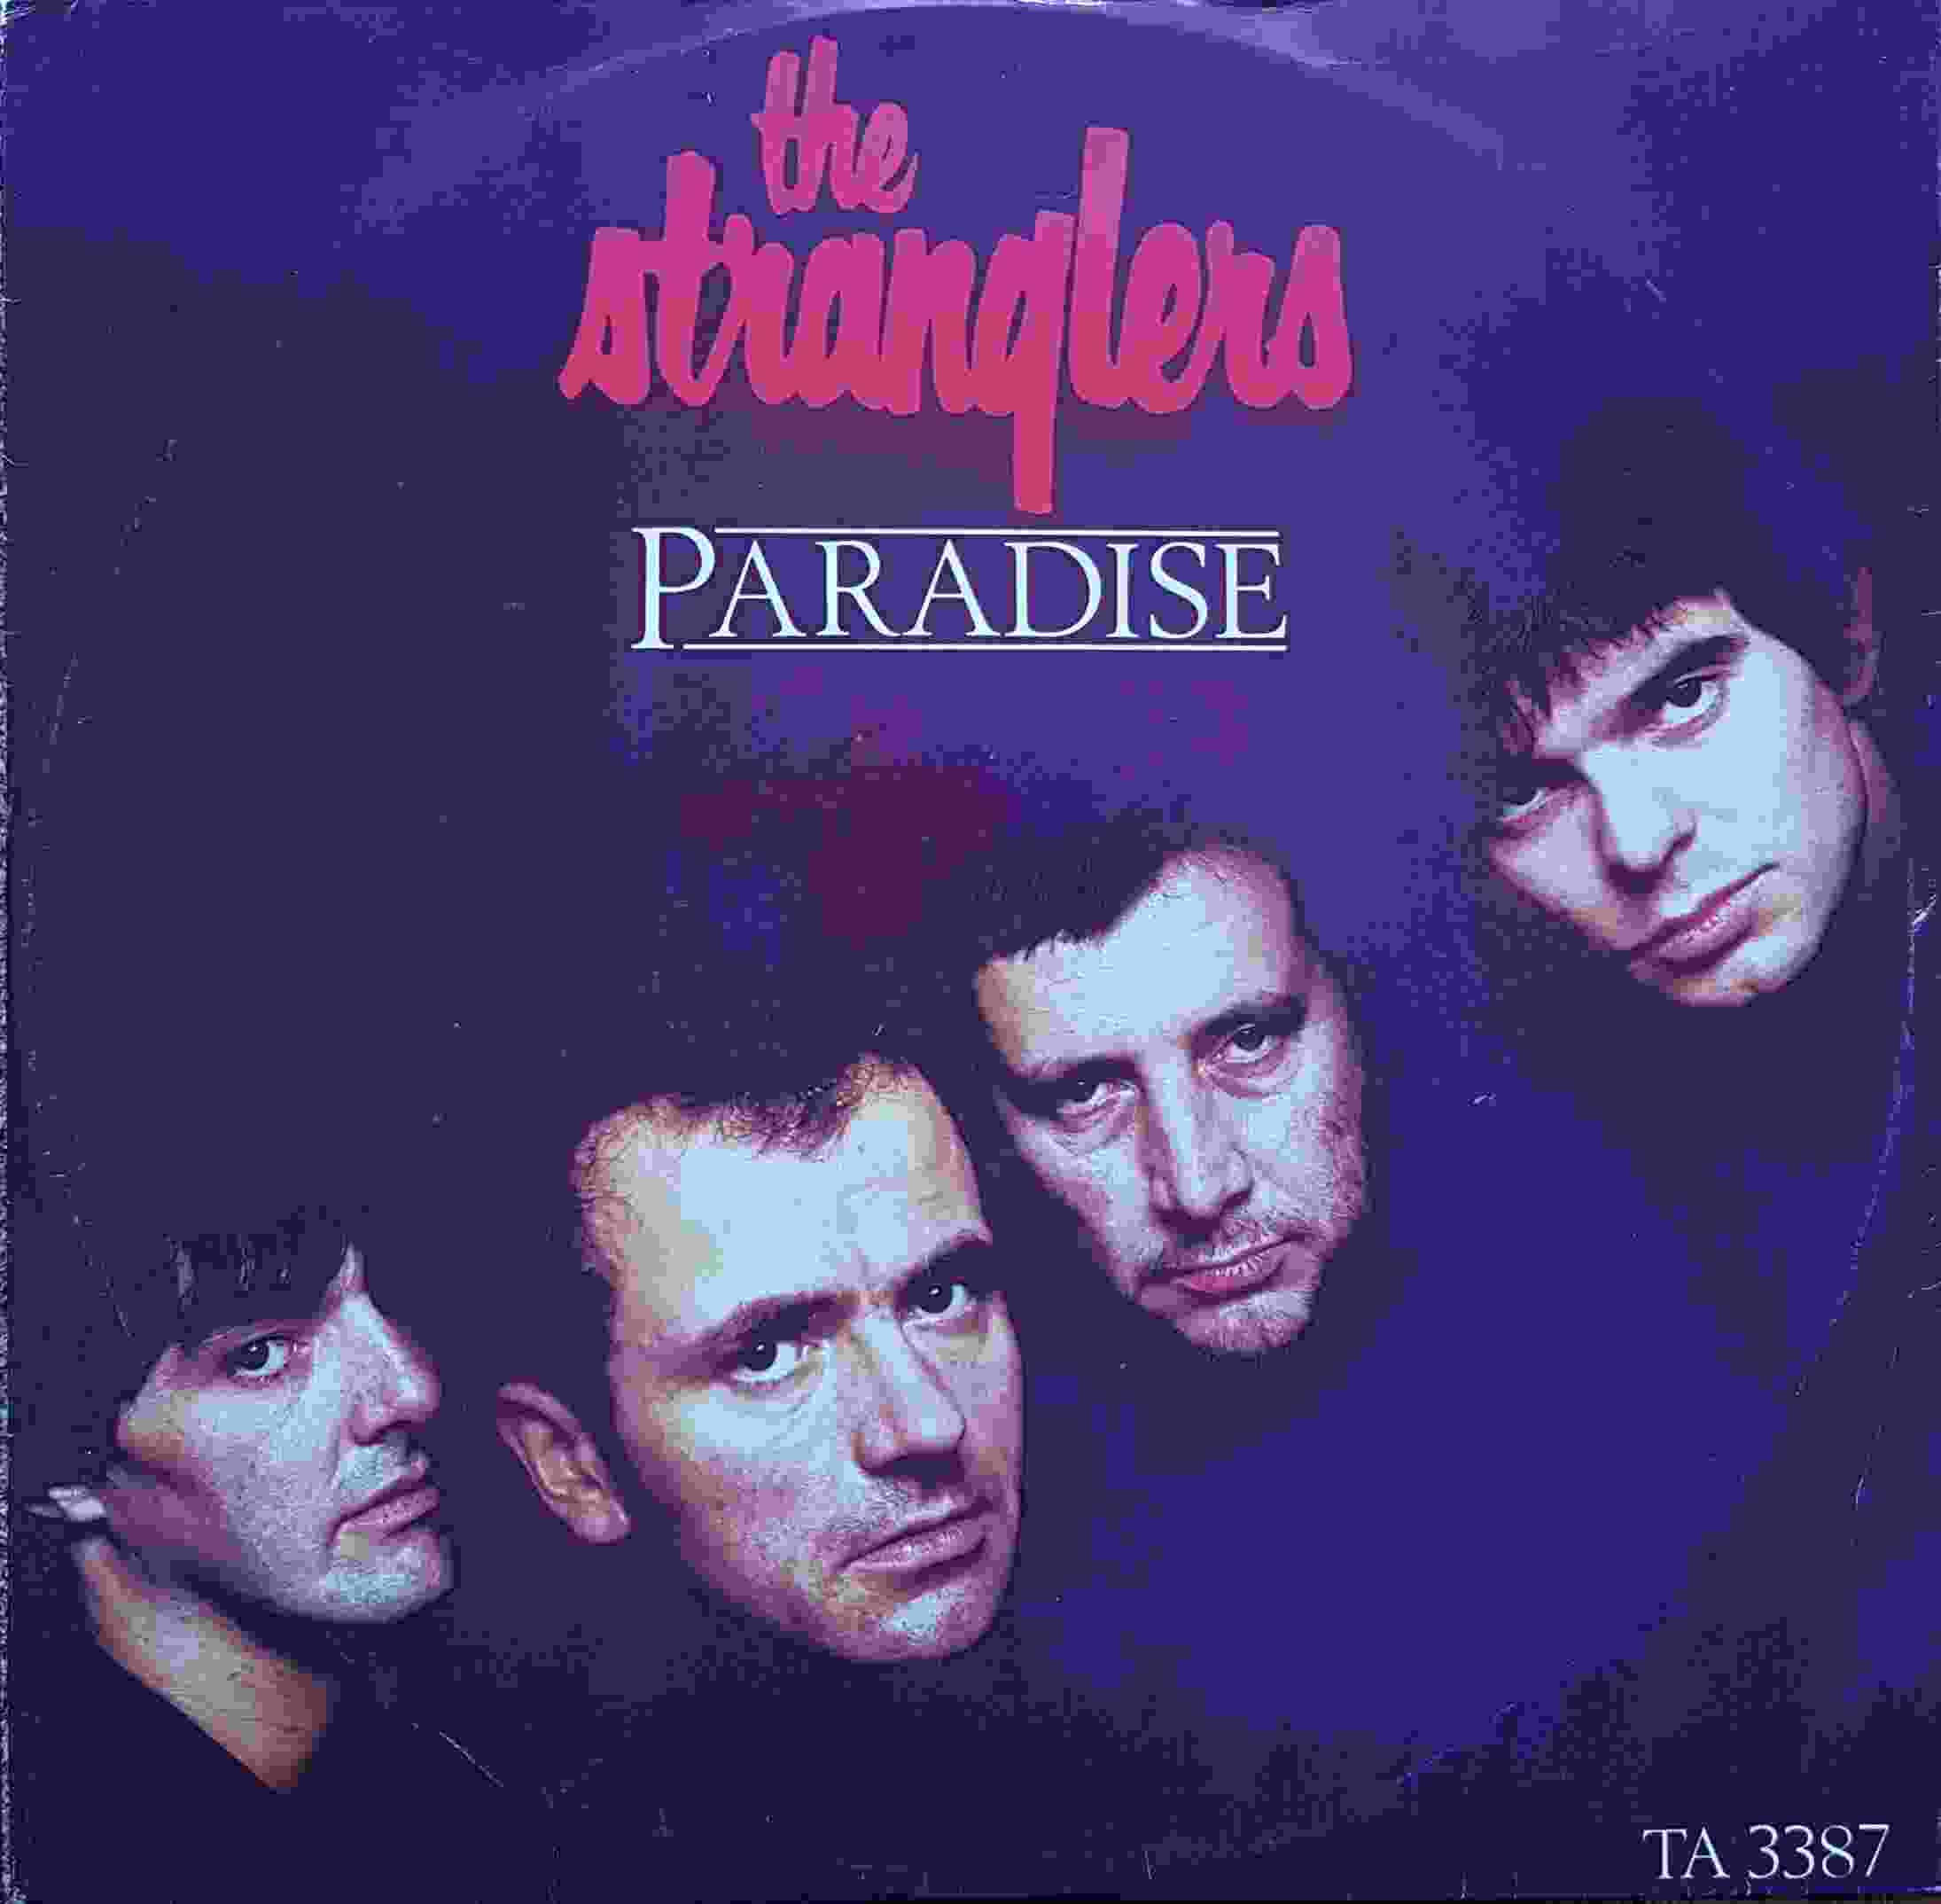 Picture of TA 3387 Paradise by artist The Stranglers